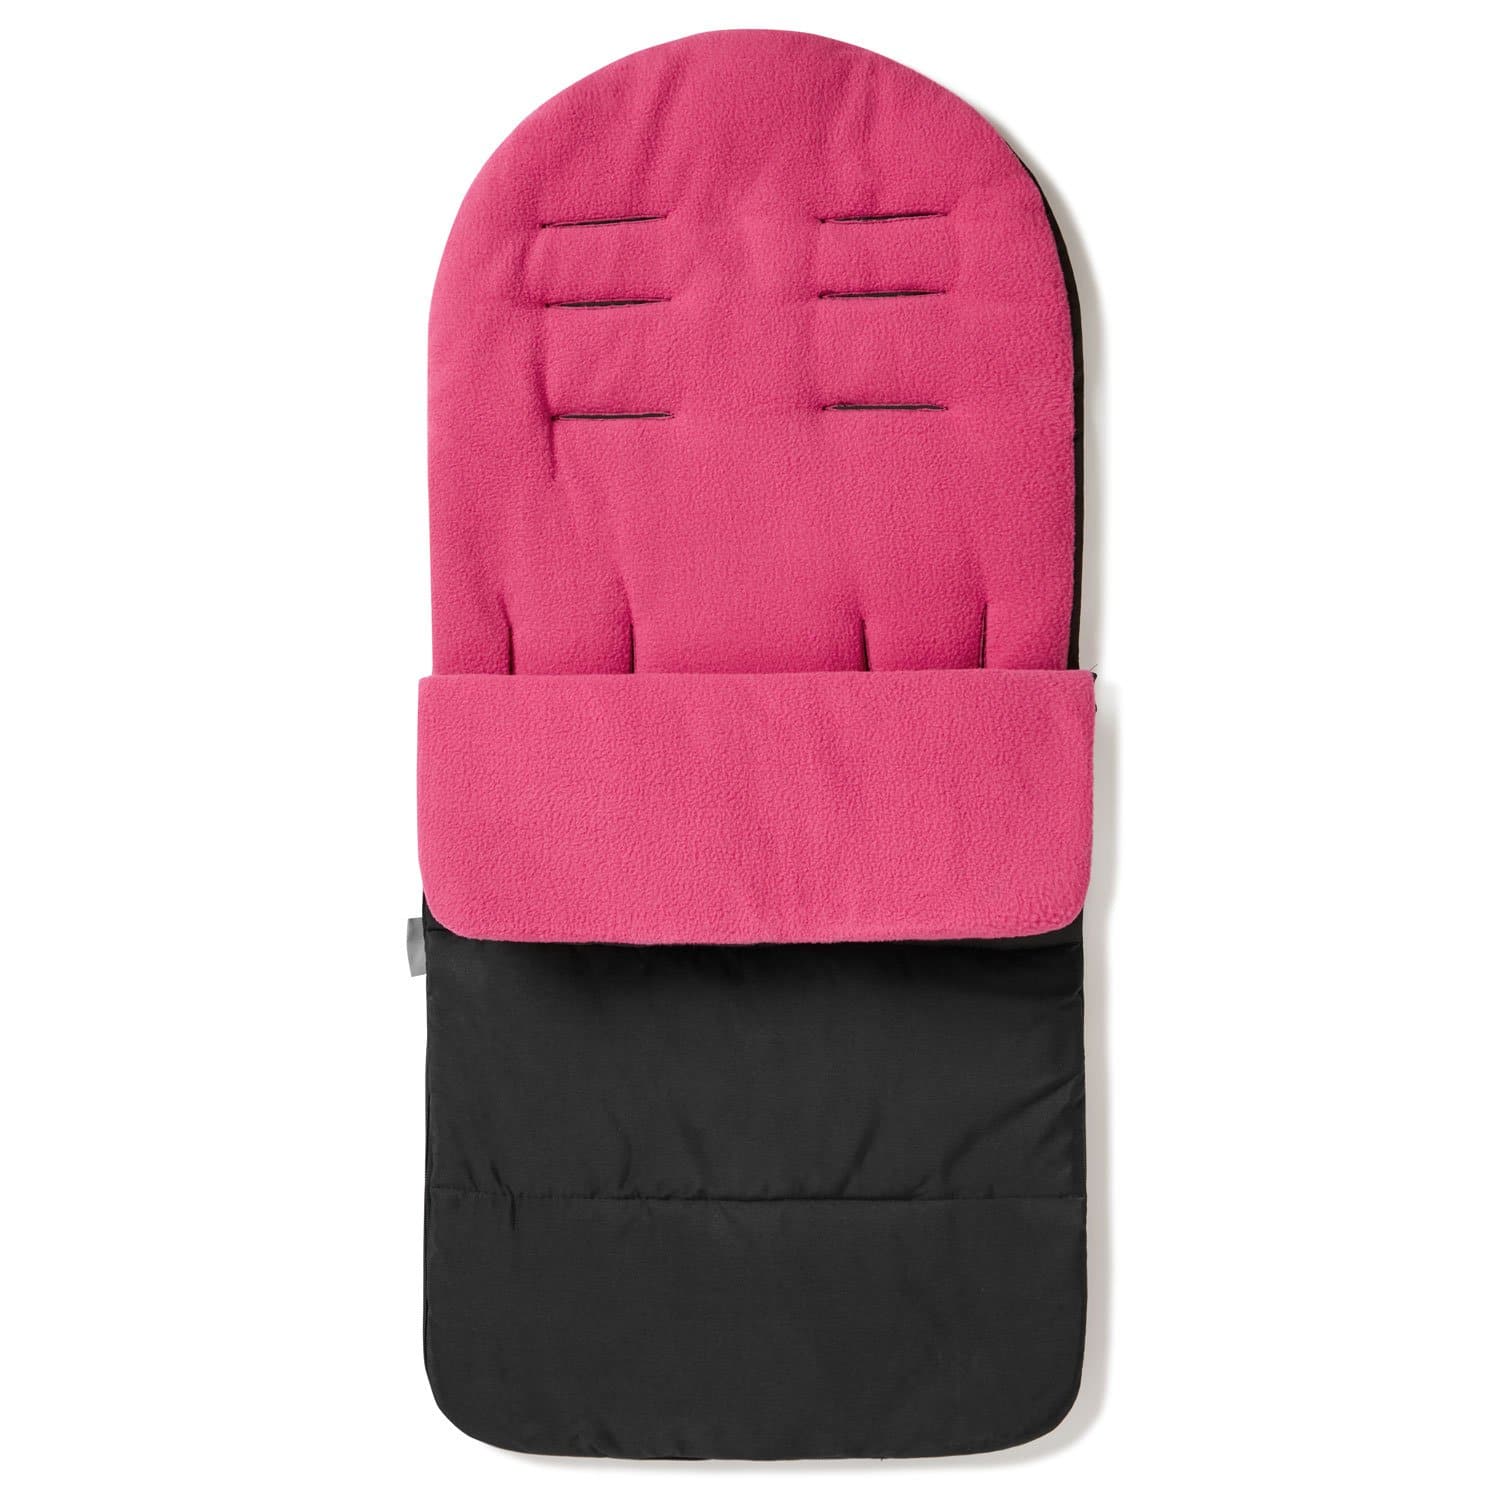 Premium Footmuff / Cosy Toes Compatible with XTS - Pink Rose / Fits All Models | For Your Little One